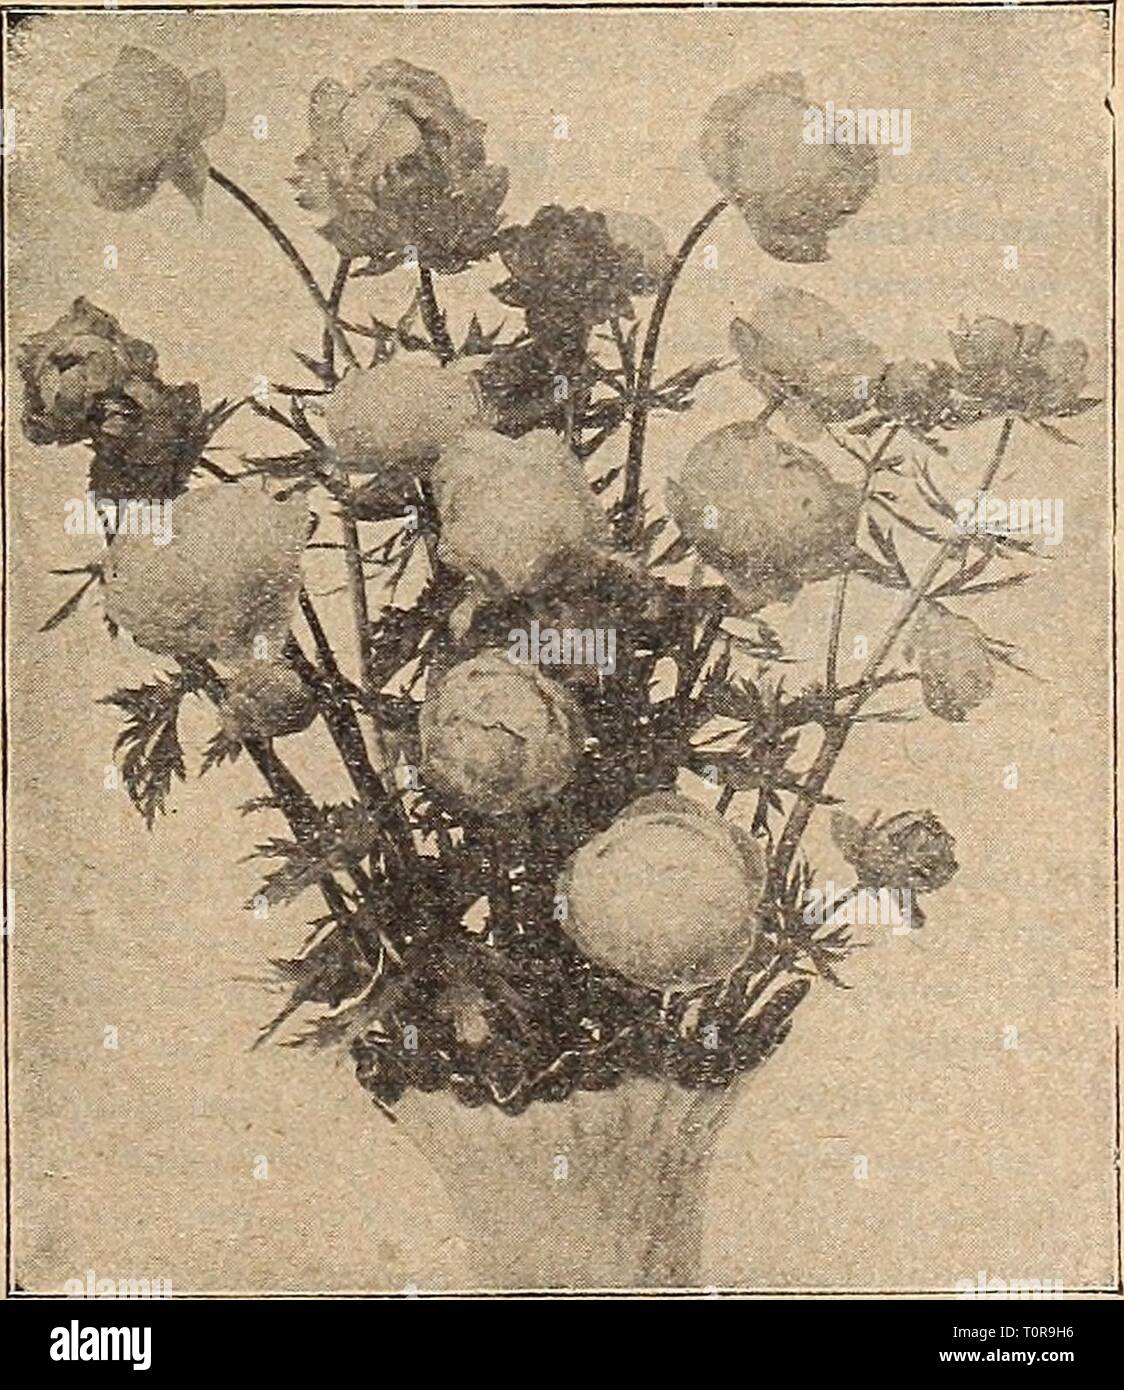 Dreer's autumn catalogue 1917 (1917) Dreer's autumn catalogue 1917  dreersautumncata1917henr Year: 1917  Veronica Longifolia Subsessilis THAI^ICTRUM (Meadow Rue) Very graceful, pretty-flowered plants, with finely-cut foliage; great favorites for planting in the hardy border; the dwarfer varieties also being effective and useful in the rockery. Adiantifolium. A beautiful variety, with foliage like the Maidenhair Fern and miniature white flowers in June and July; IJ to 2 feet. Aquilegifolium atropurpureum. Elegant, graceful foli- age and masses of rosy-purple flowers; May to July; 2 to 3 feet. — Stock Photo